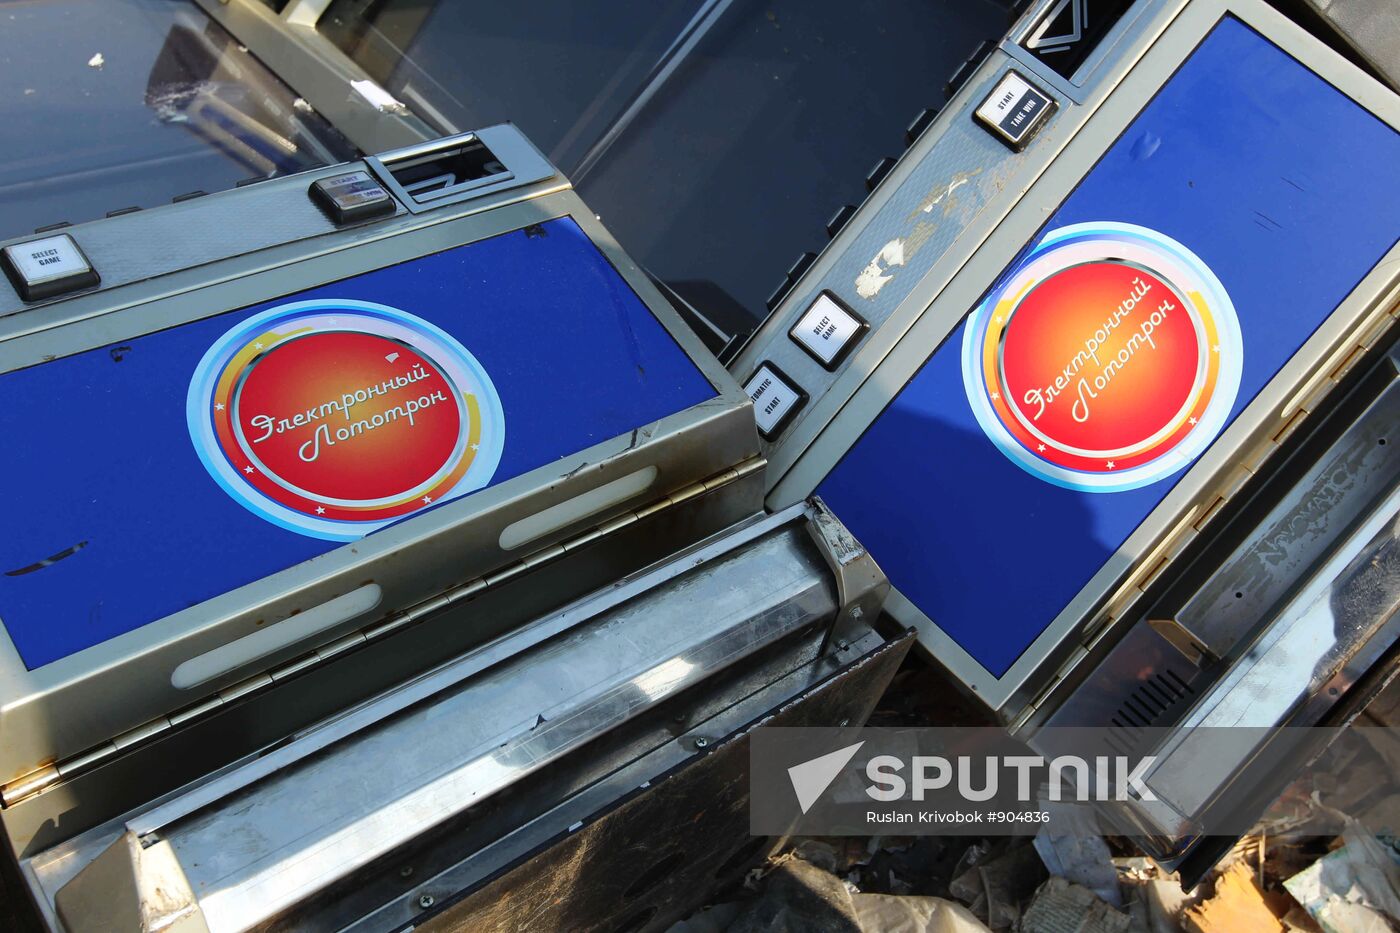 Destruction of slot machines in the Moscow Region